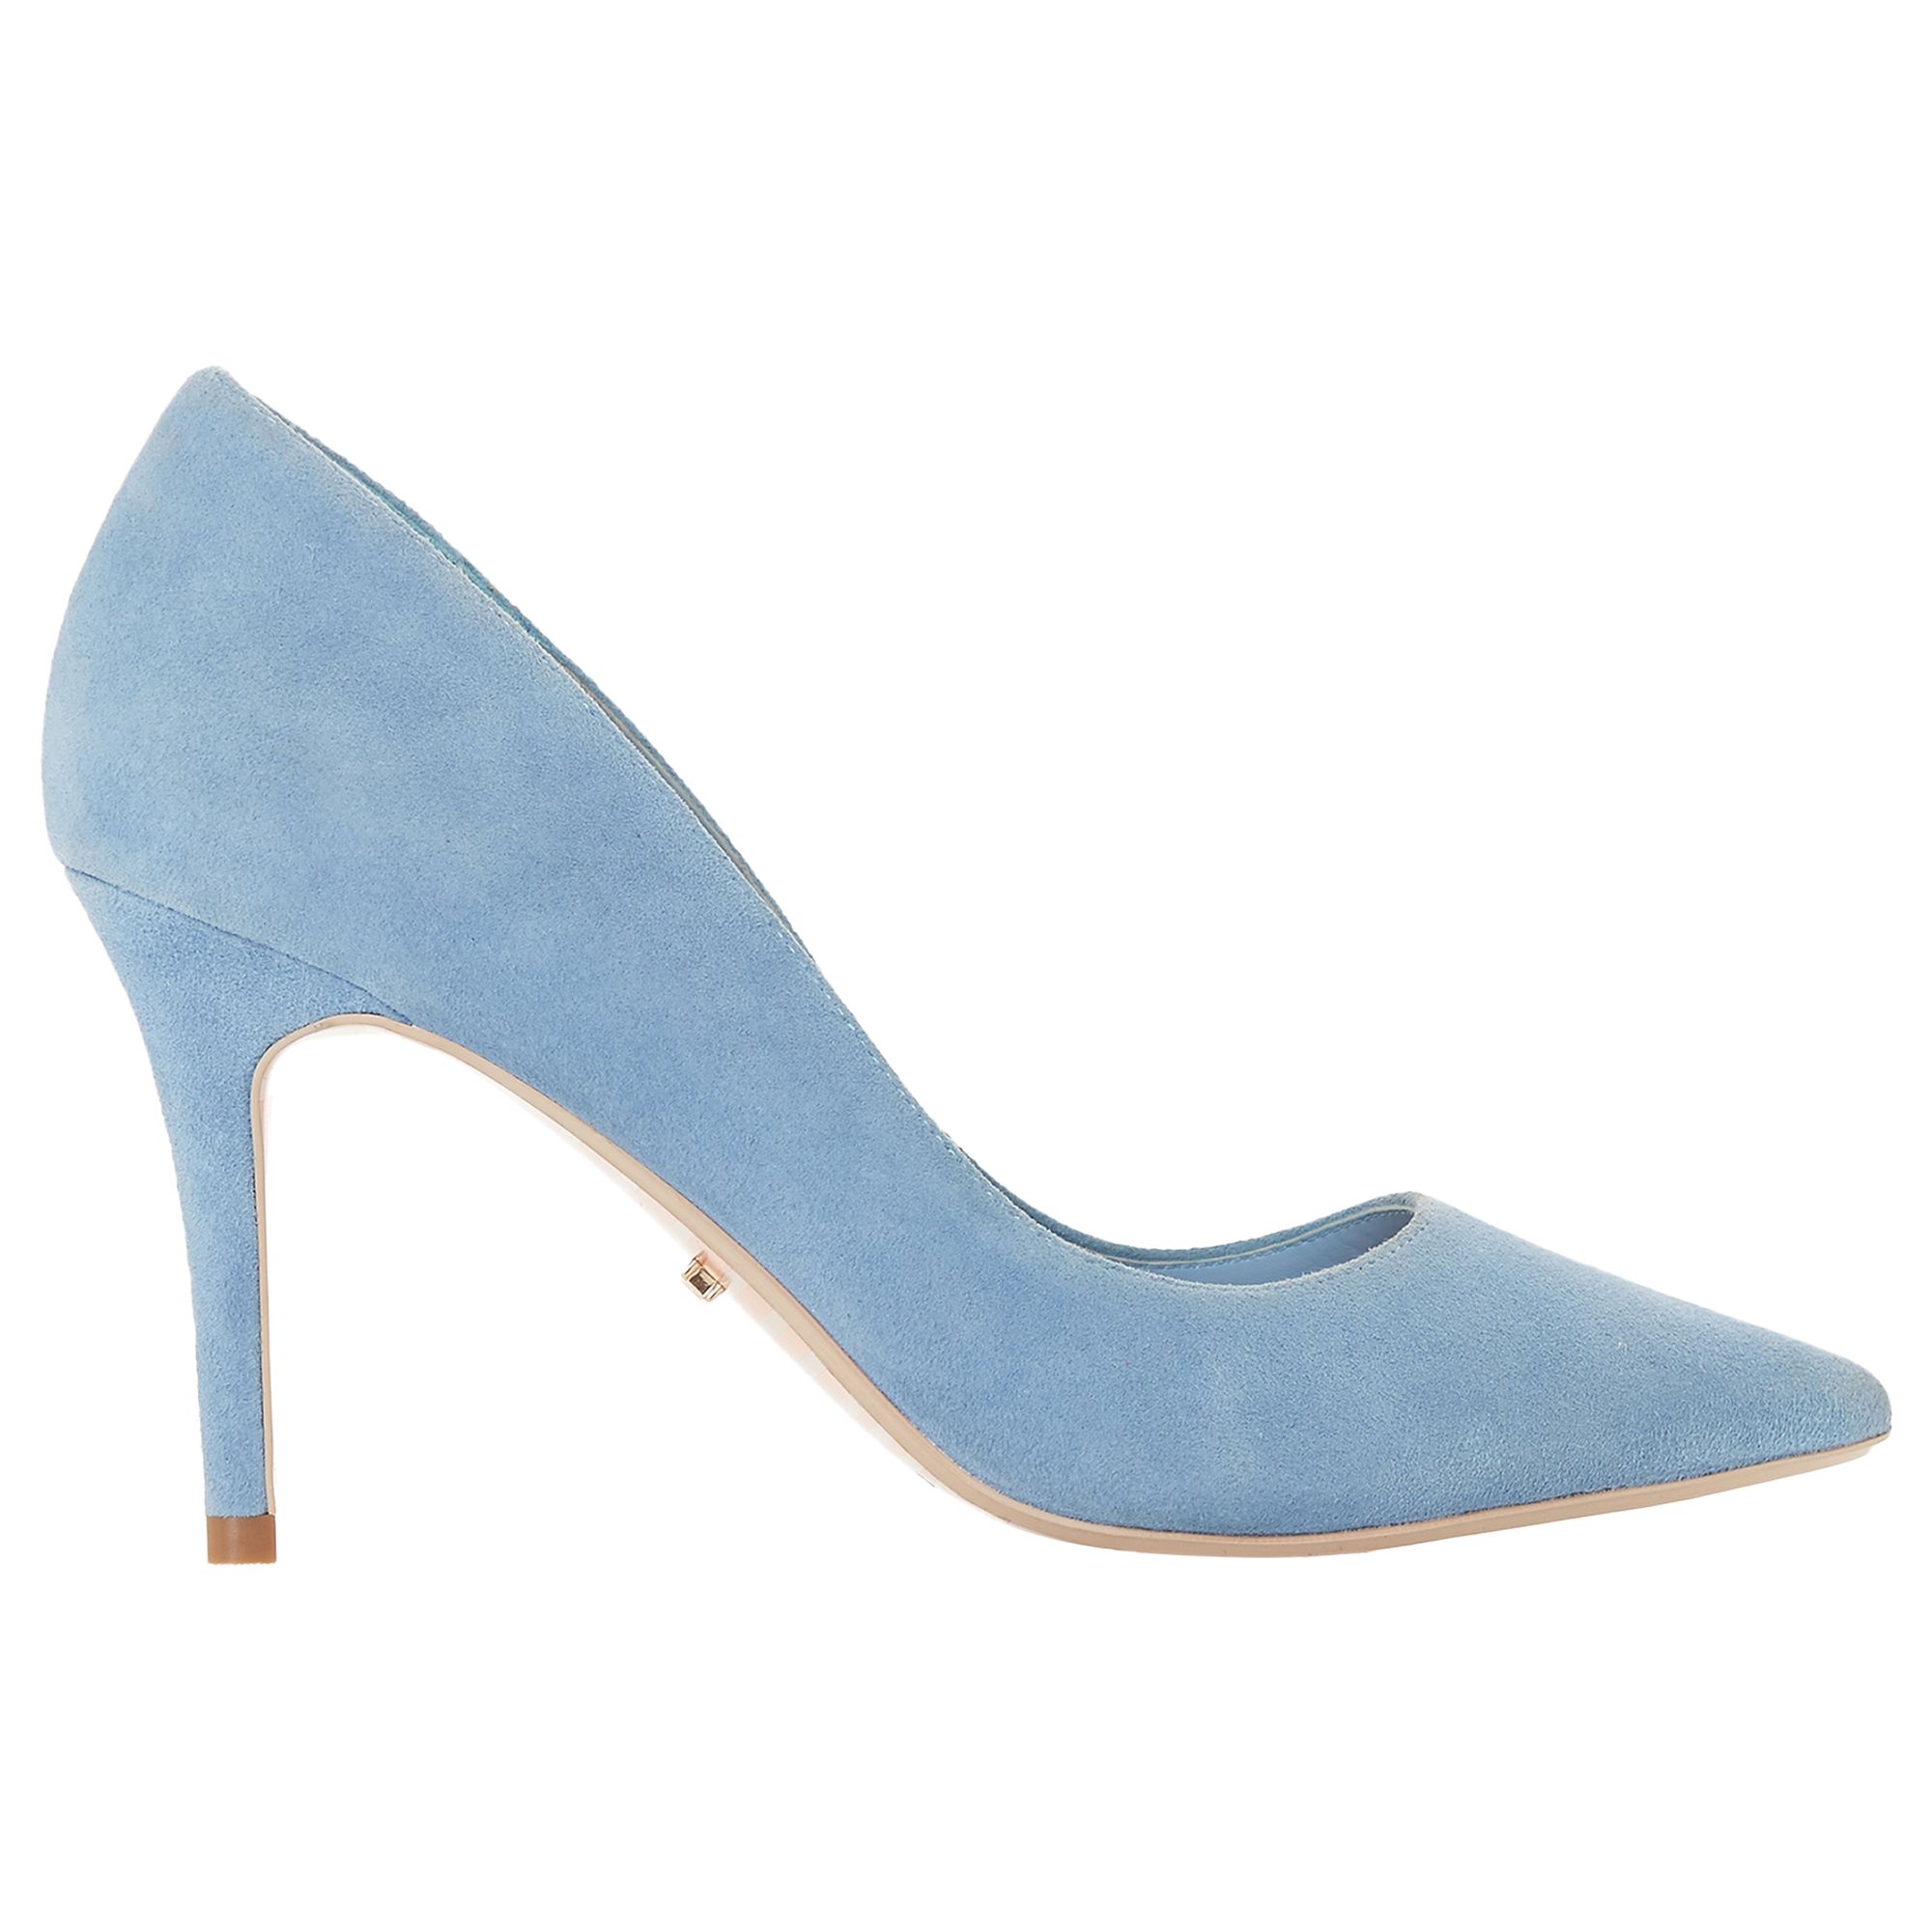 Dune Aurrora Pointed Toe Court Shoes, Blue Suede, 4